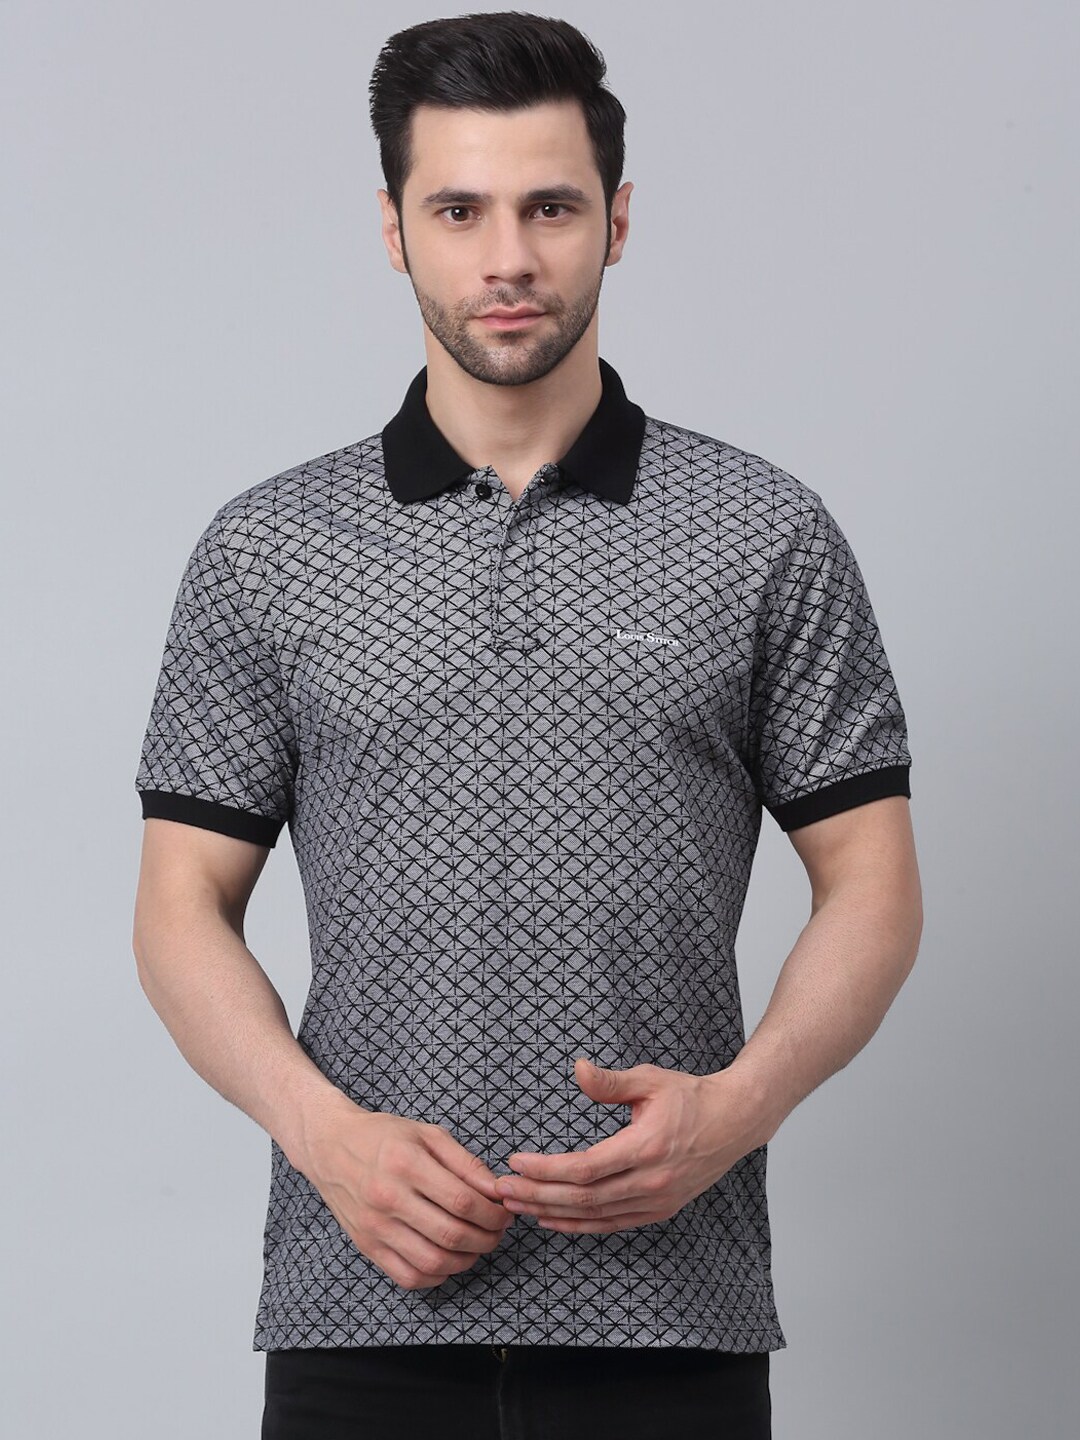 LOUIS STITCH Geometric Printed Polo Collar Dry Fit Technology Slim Fit T-shirt